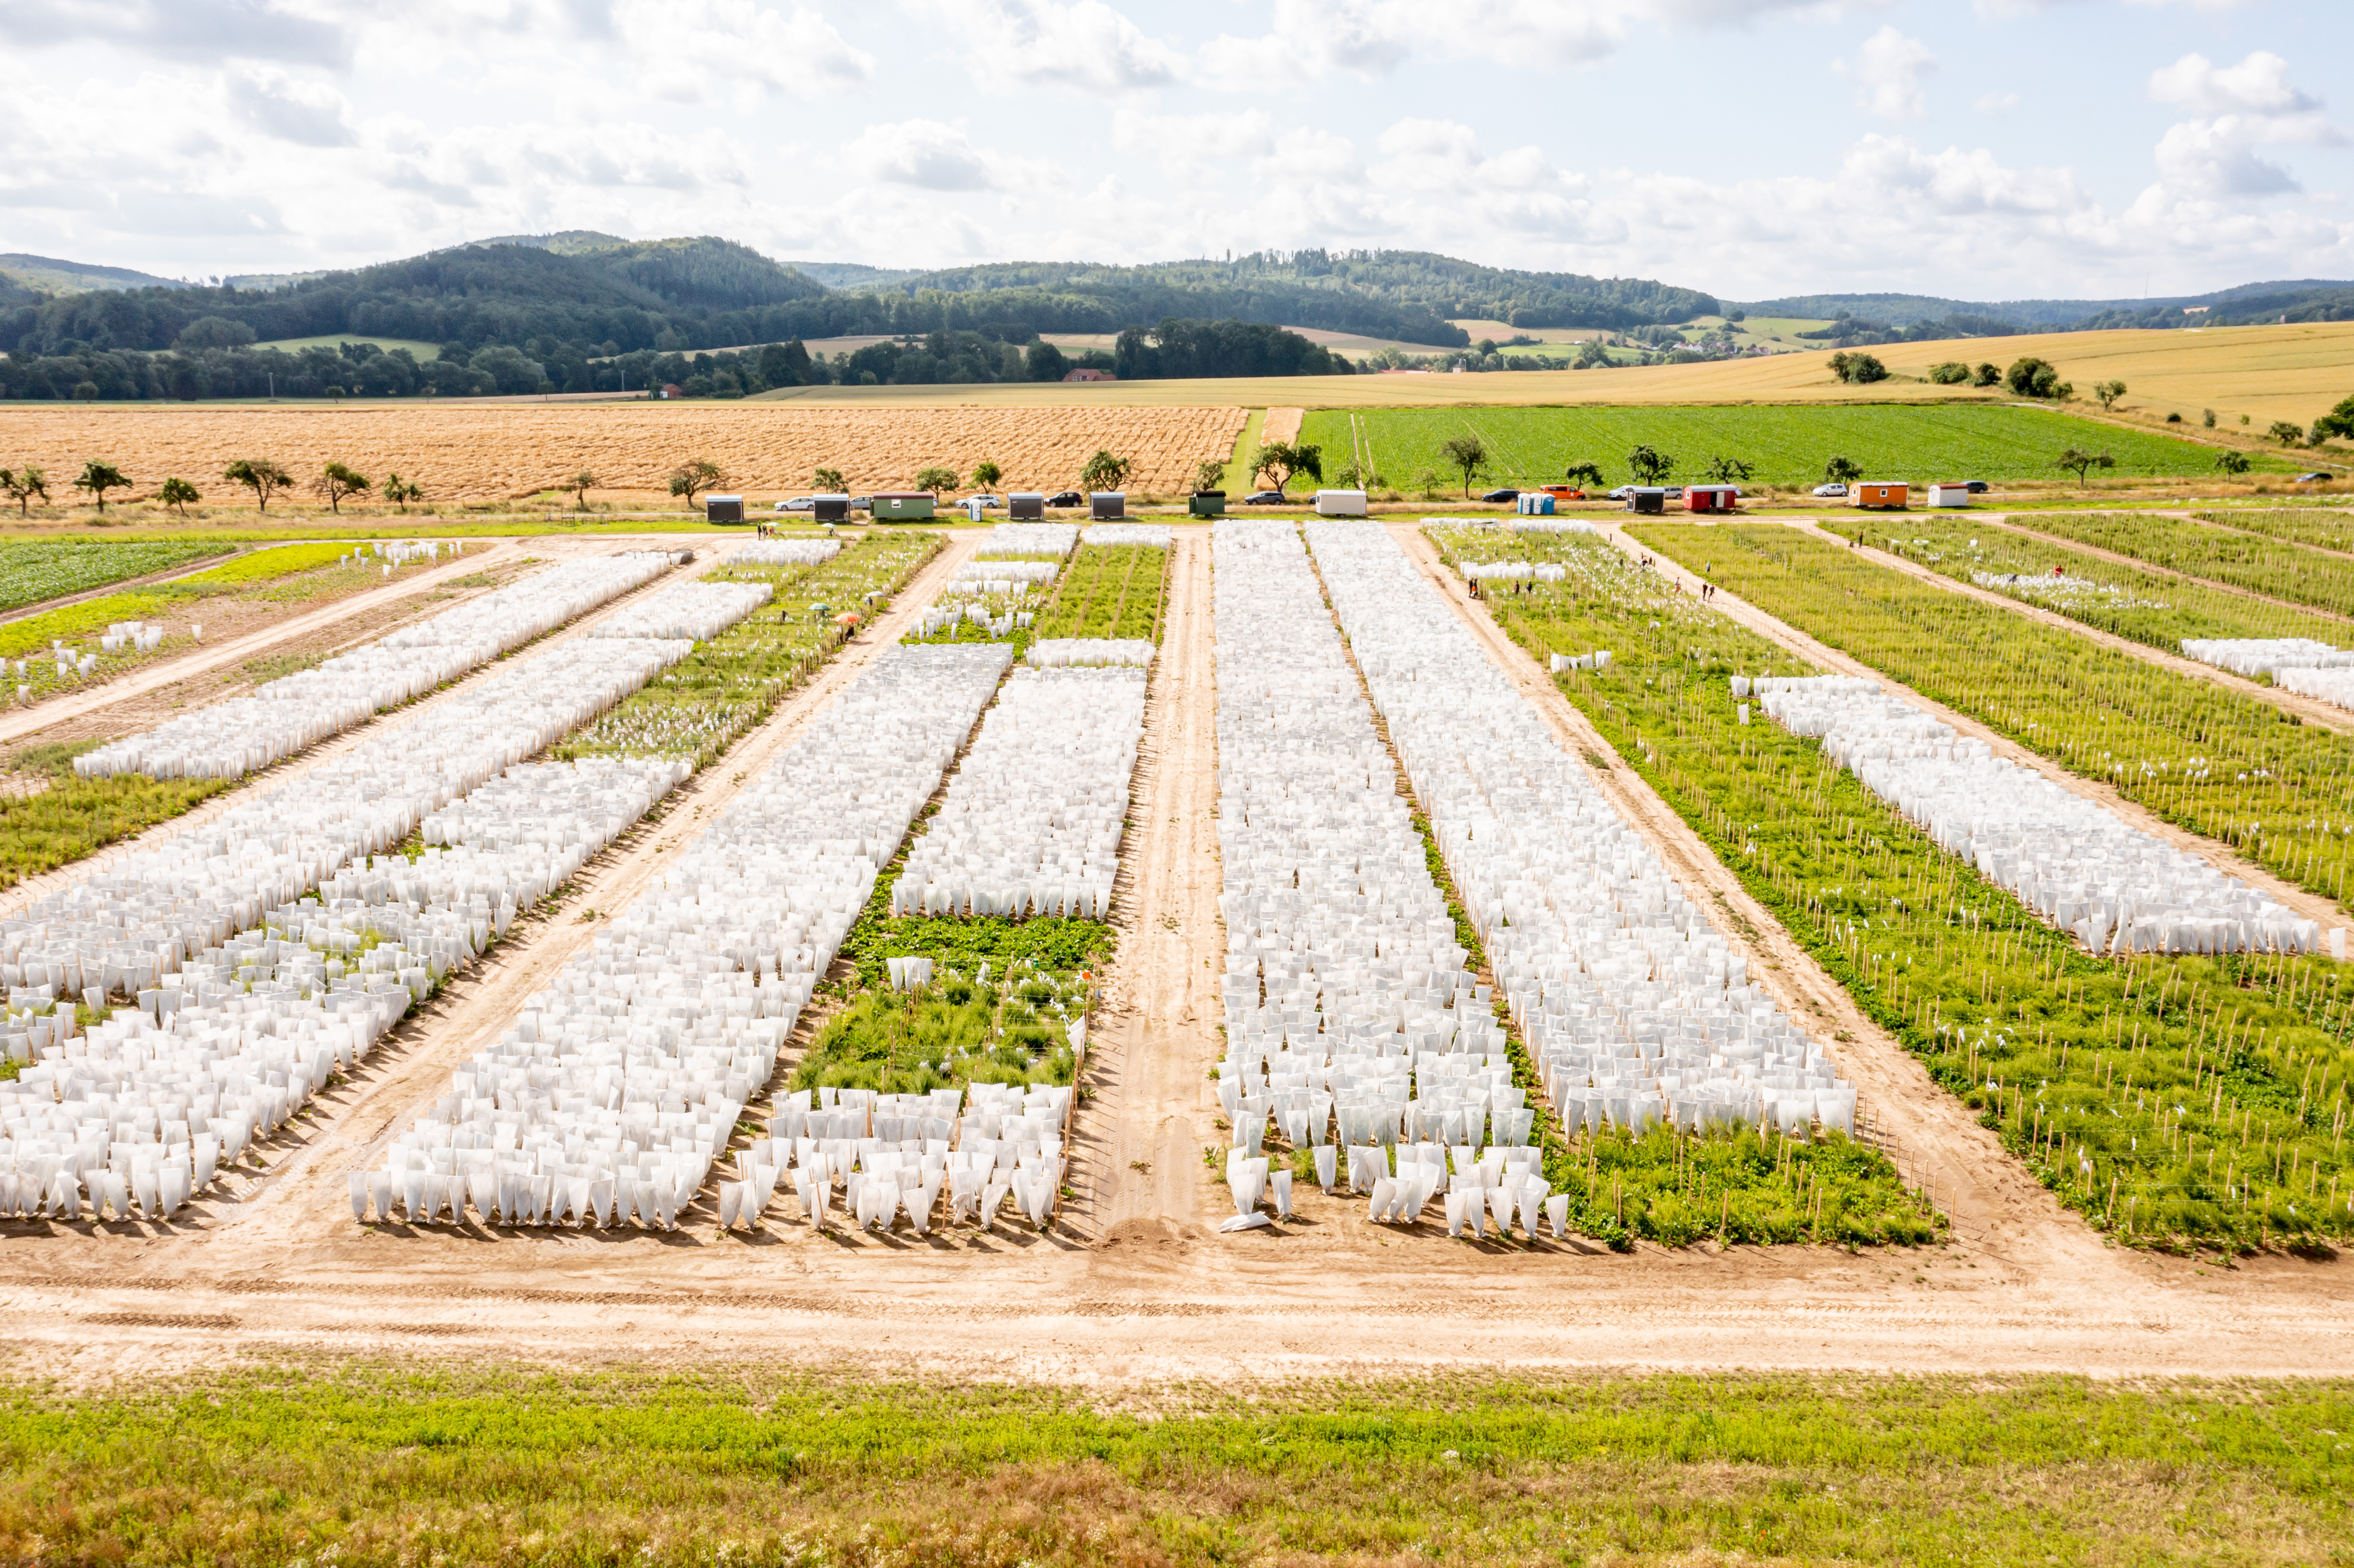 In trial fields like this, around 1,800 castrations are carried out and around 15,000 to 18,000 beet plants are packed in isolation bags within 4 weeks.